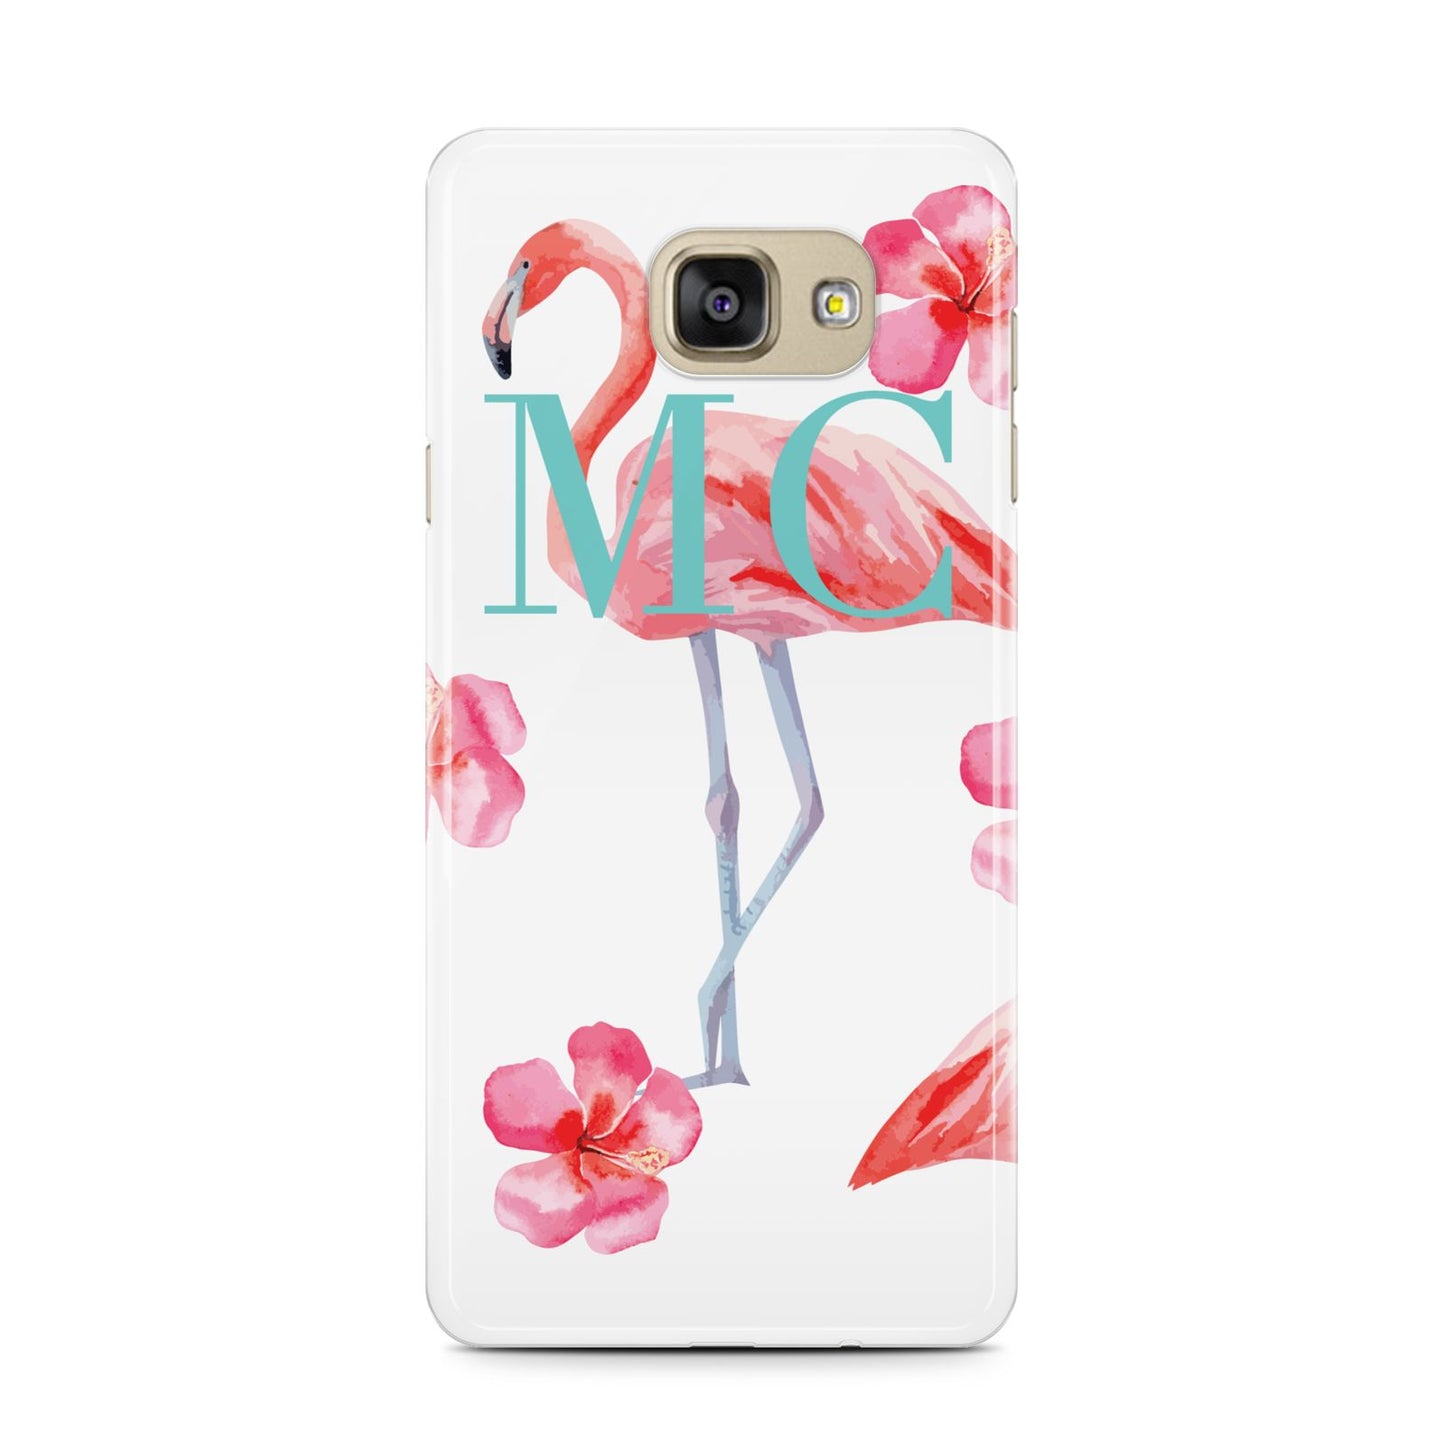 Personalised Initials Flamingo 3 Samsung Galaxy A7 2016 Case on gold phone